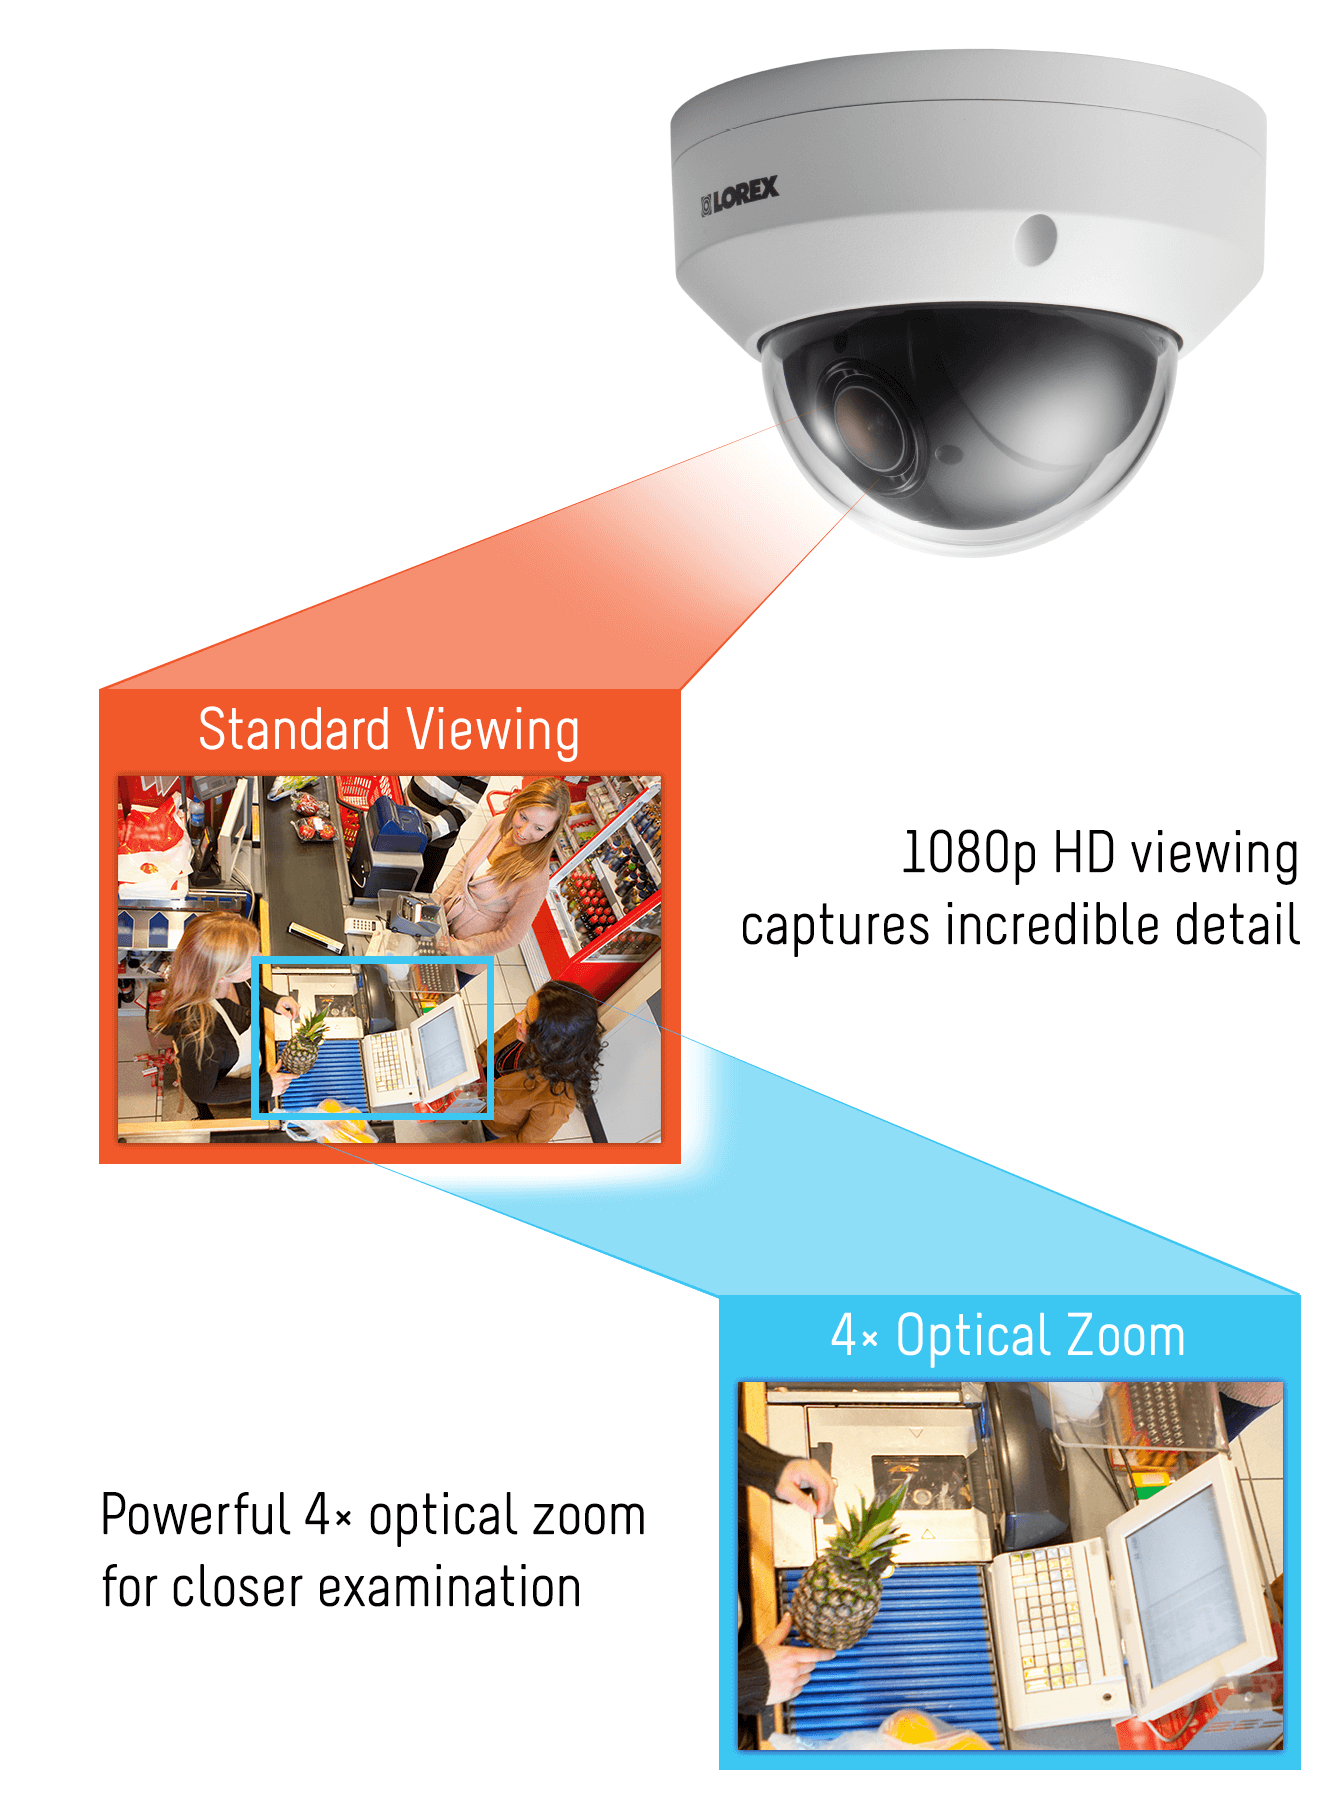 Security camera with optical zoom and digital zoom